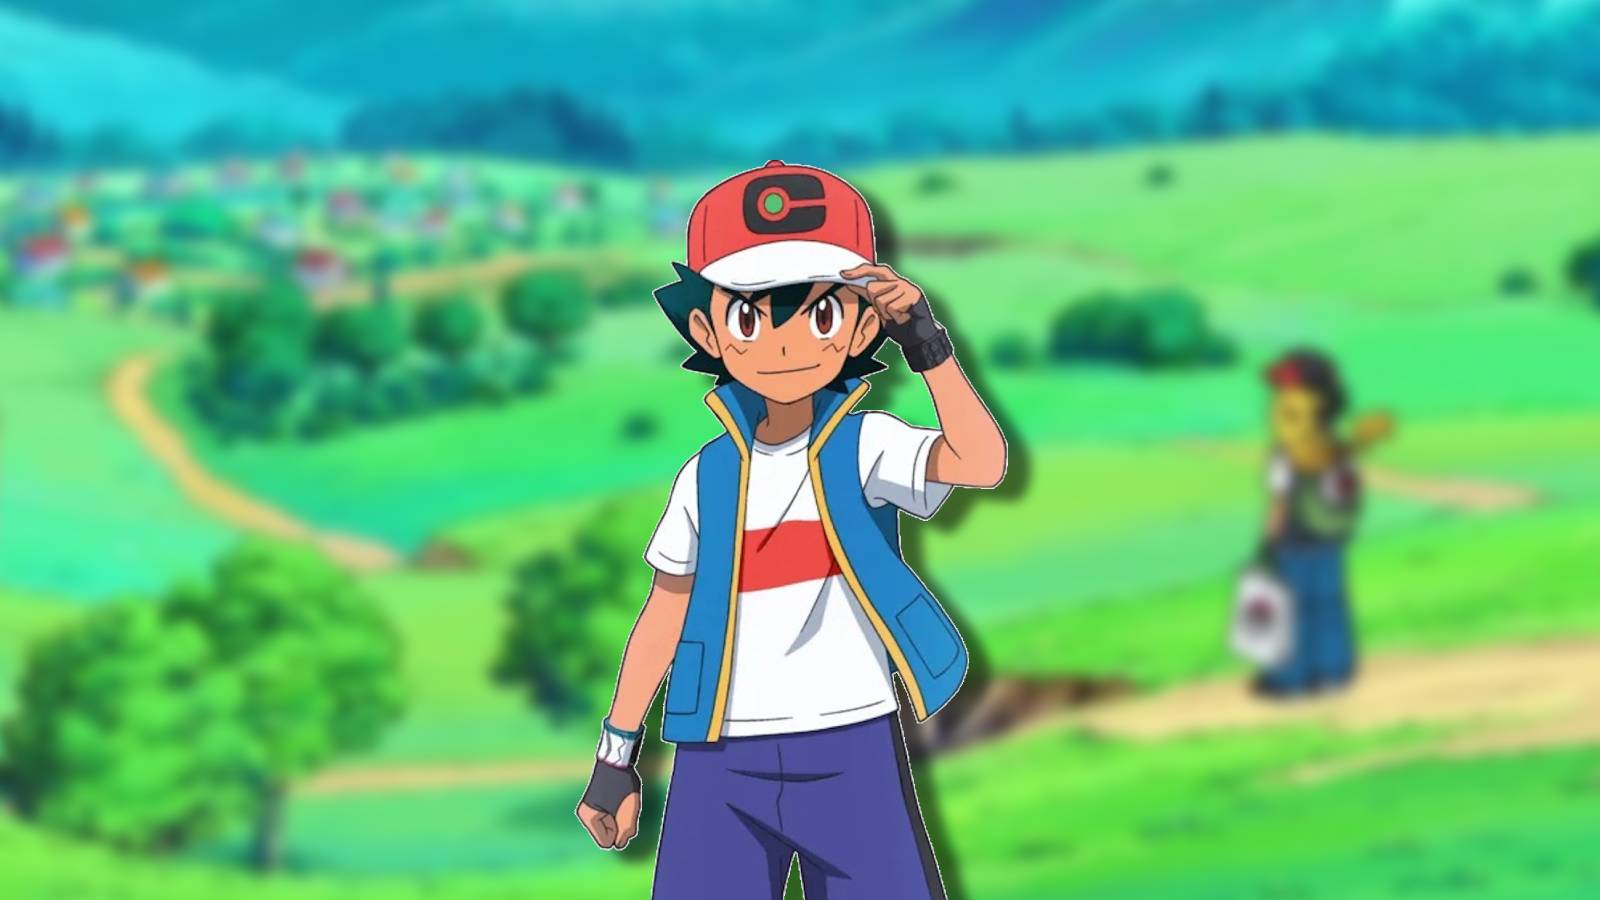 Ash Ketchum stands in a remote area, against a blurred background